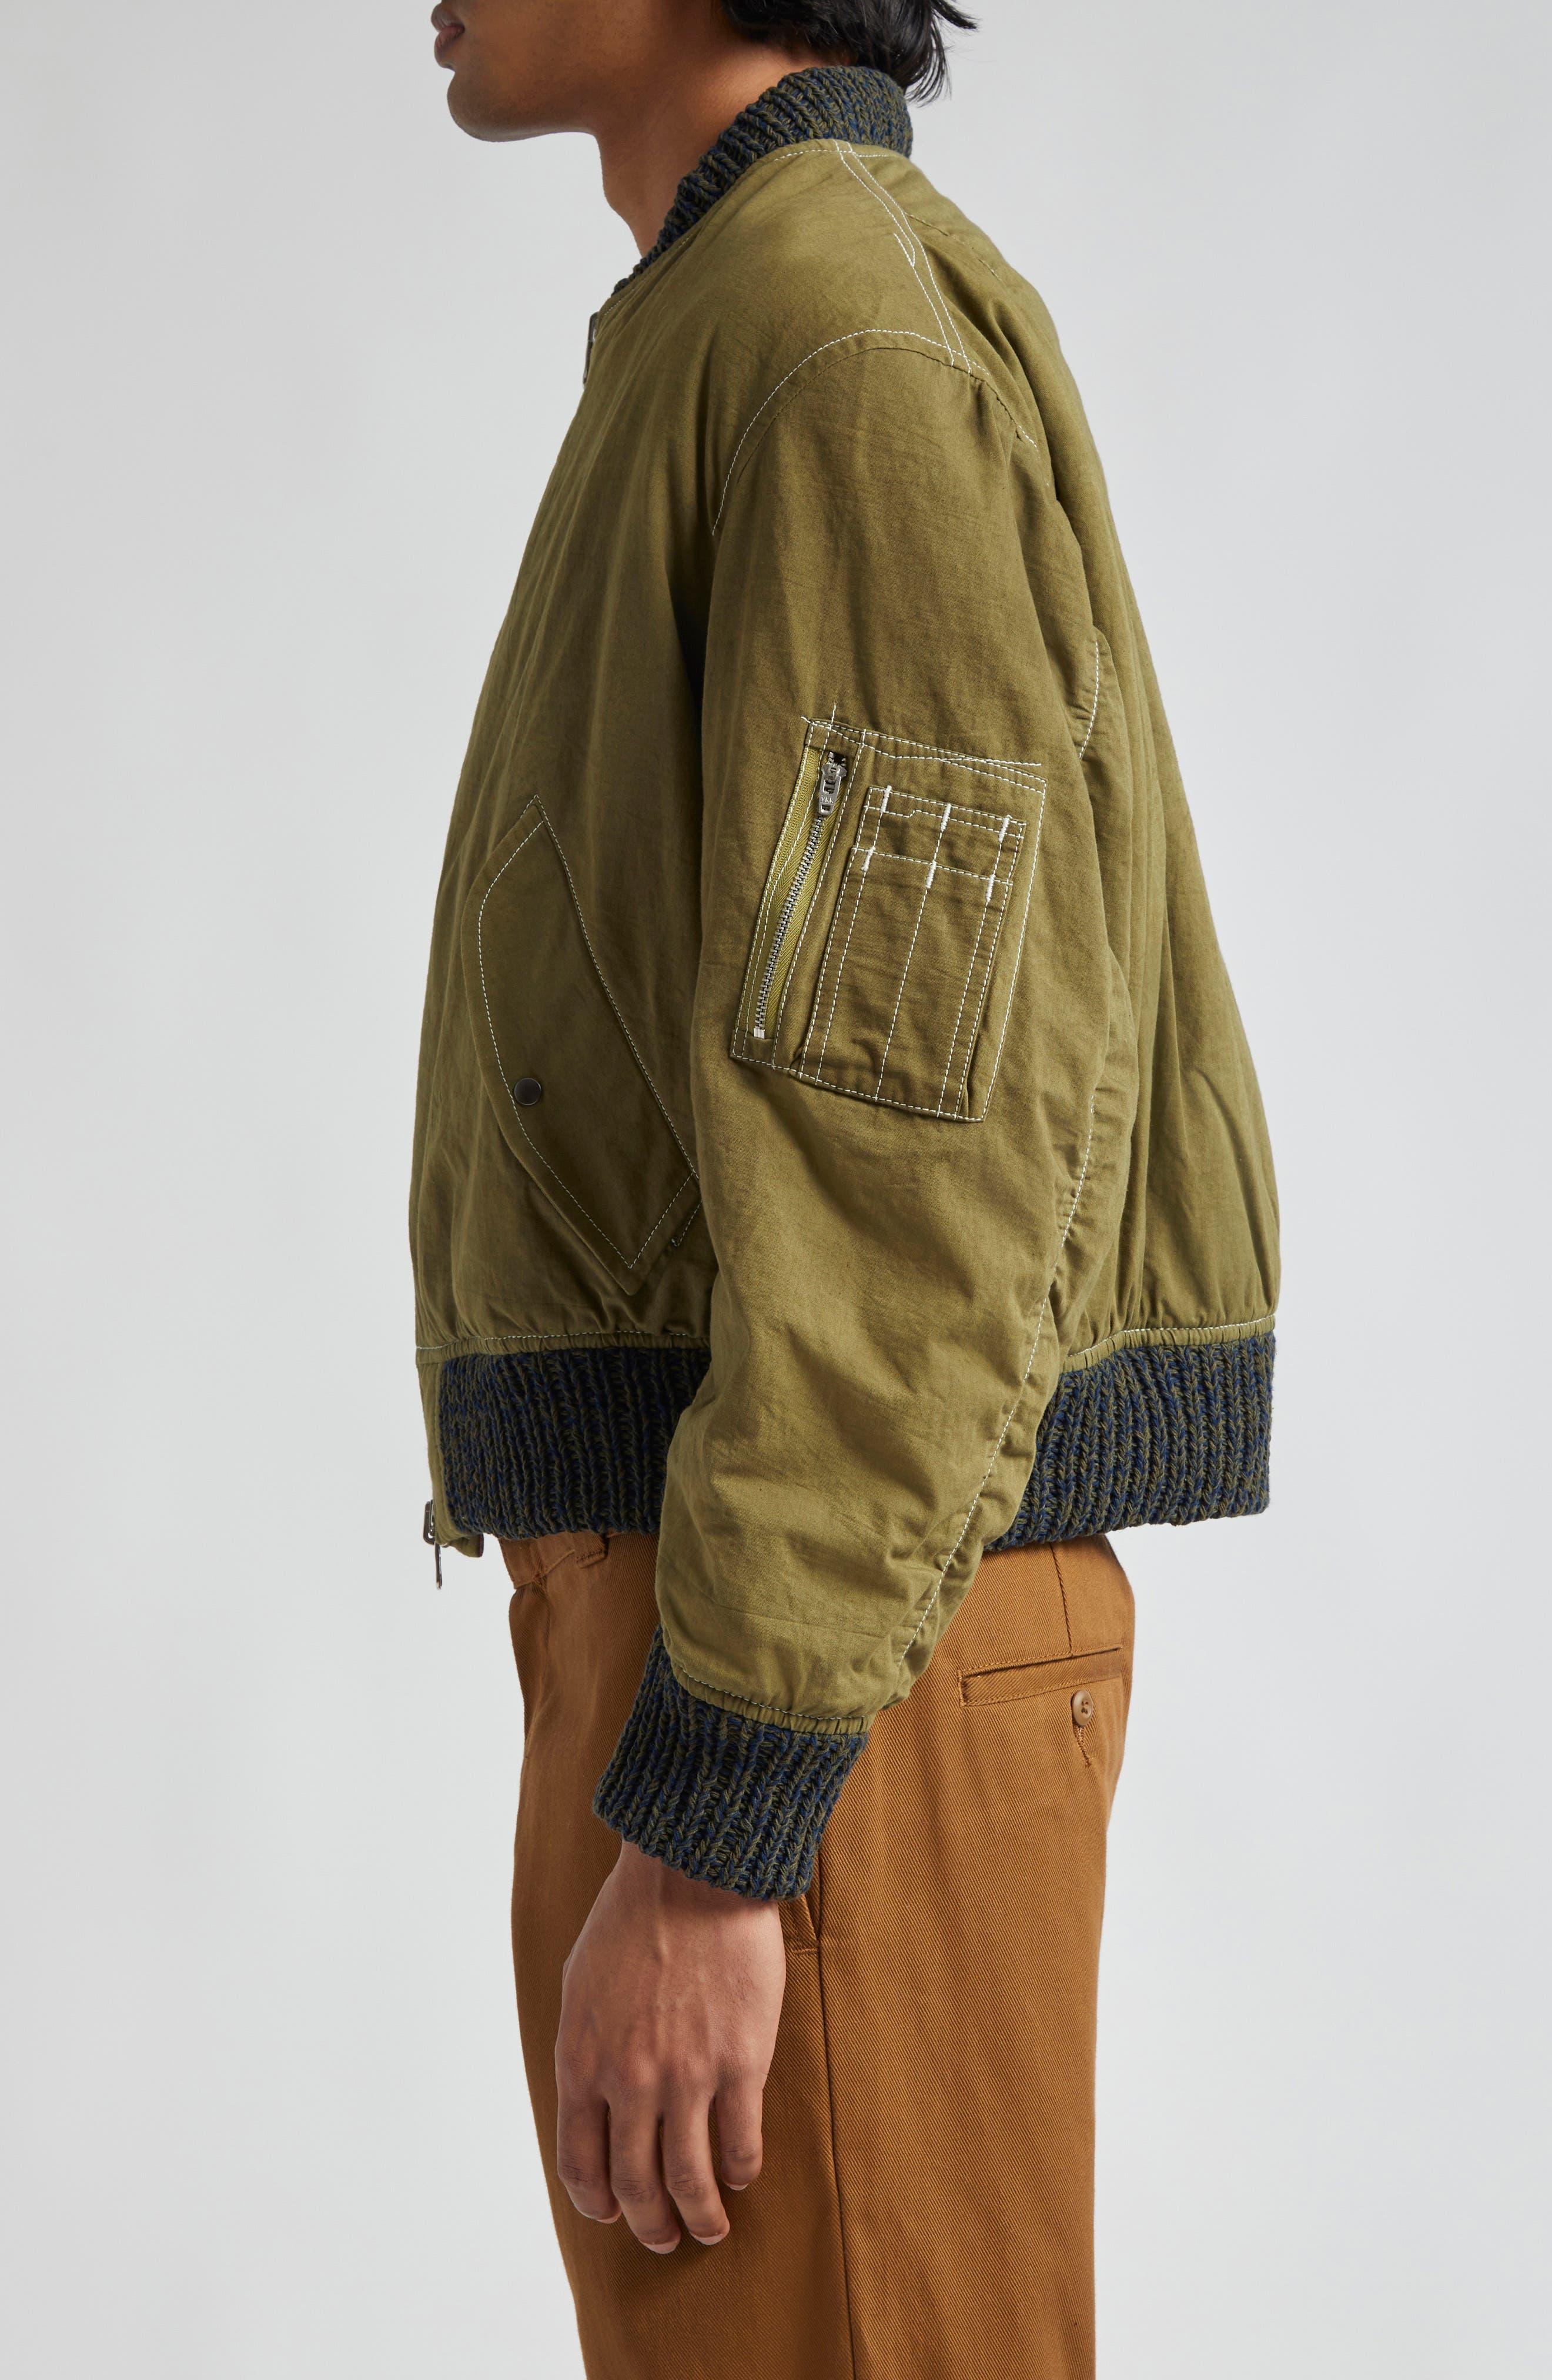 STORY mfg. Seed Reversible Organic Cotton Bomber Jacket in Green 